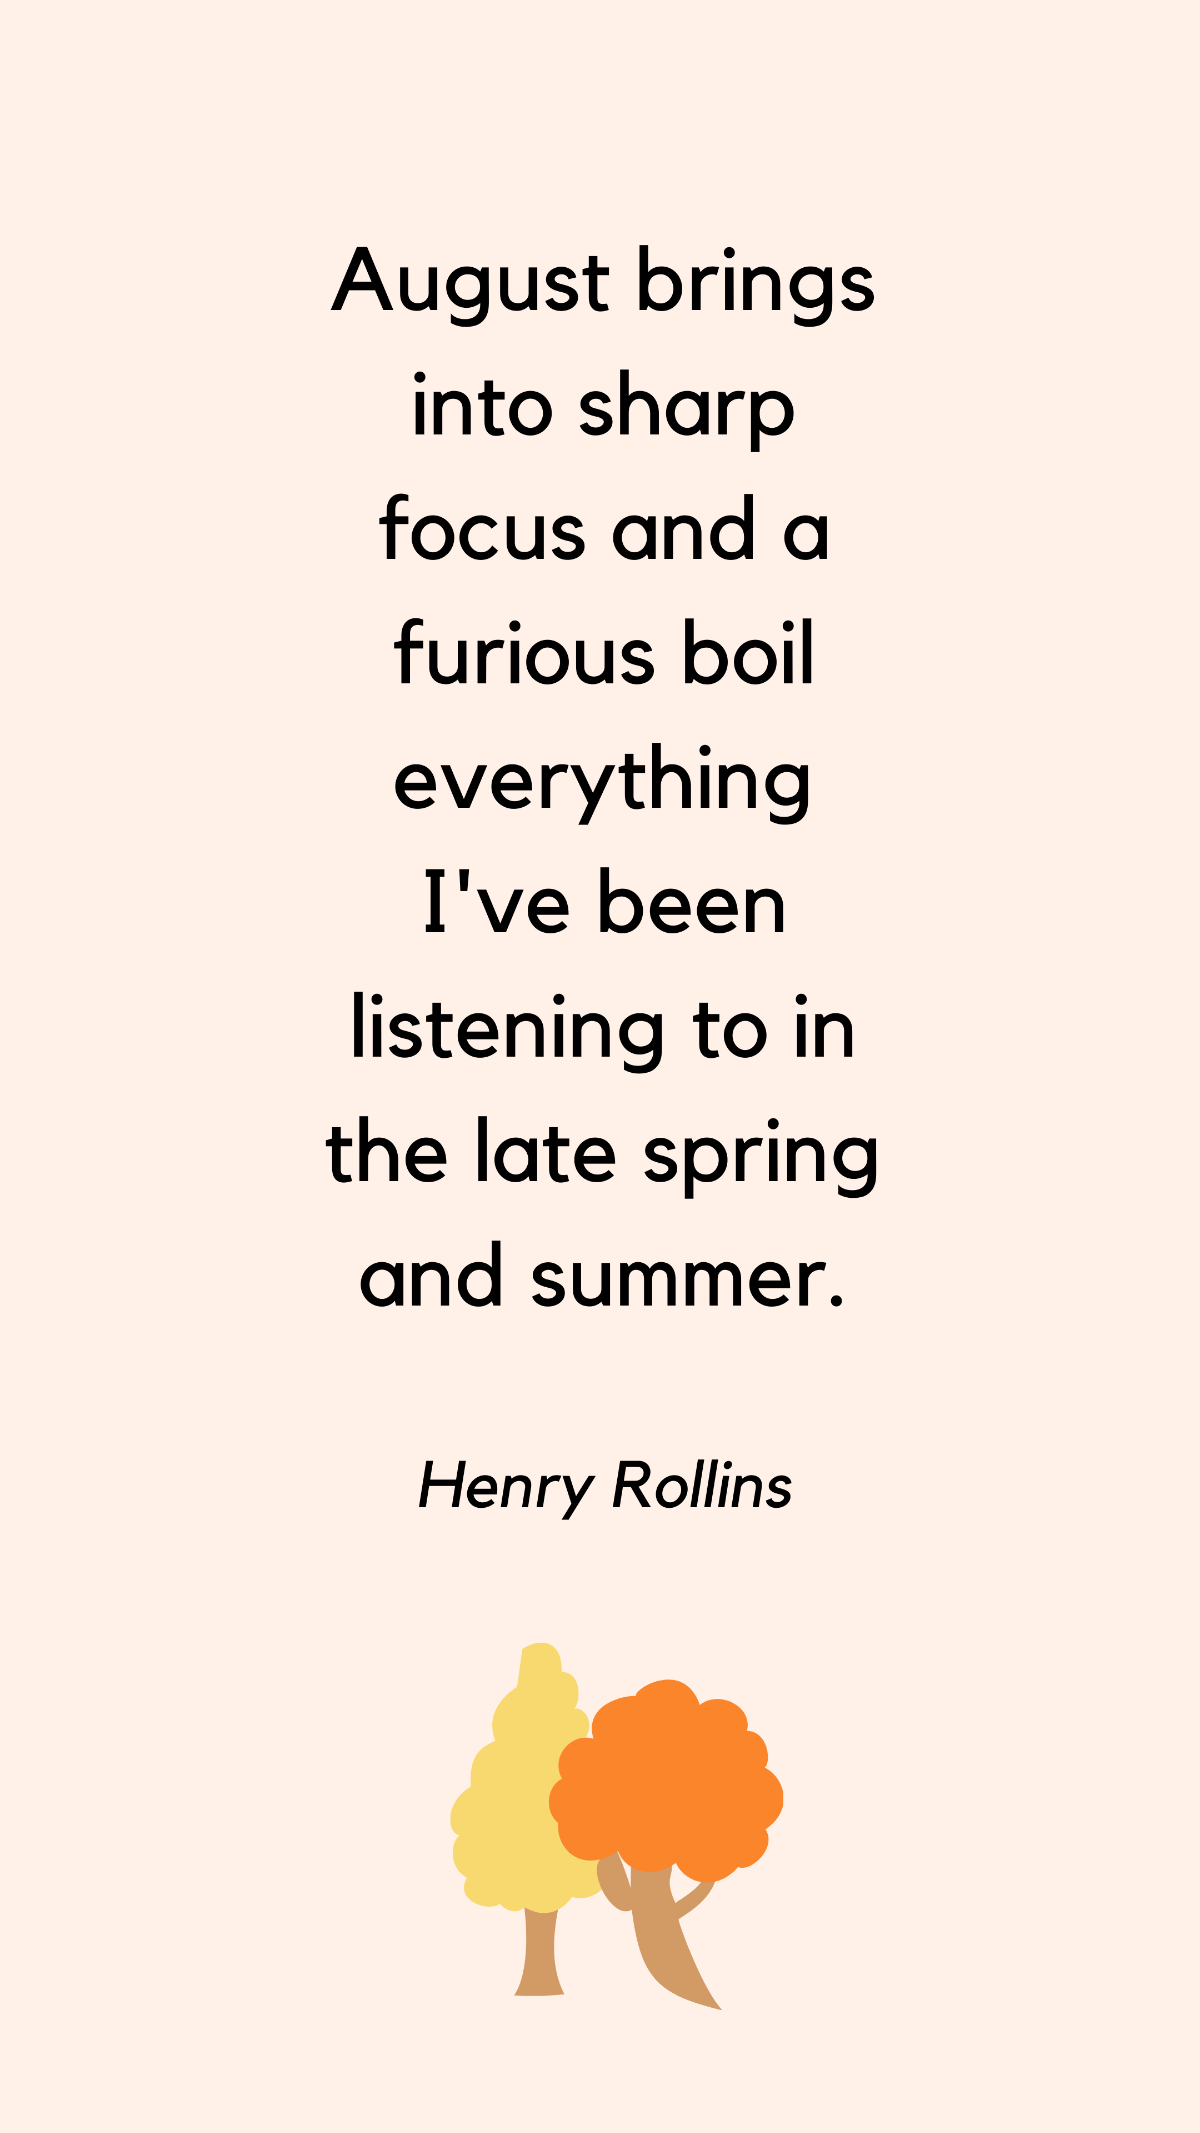 Henry Rollins - August brings into sharp focus and a furious boil everything I've been listening to in the late spring and summer. Template